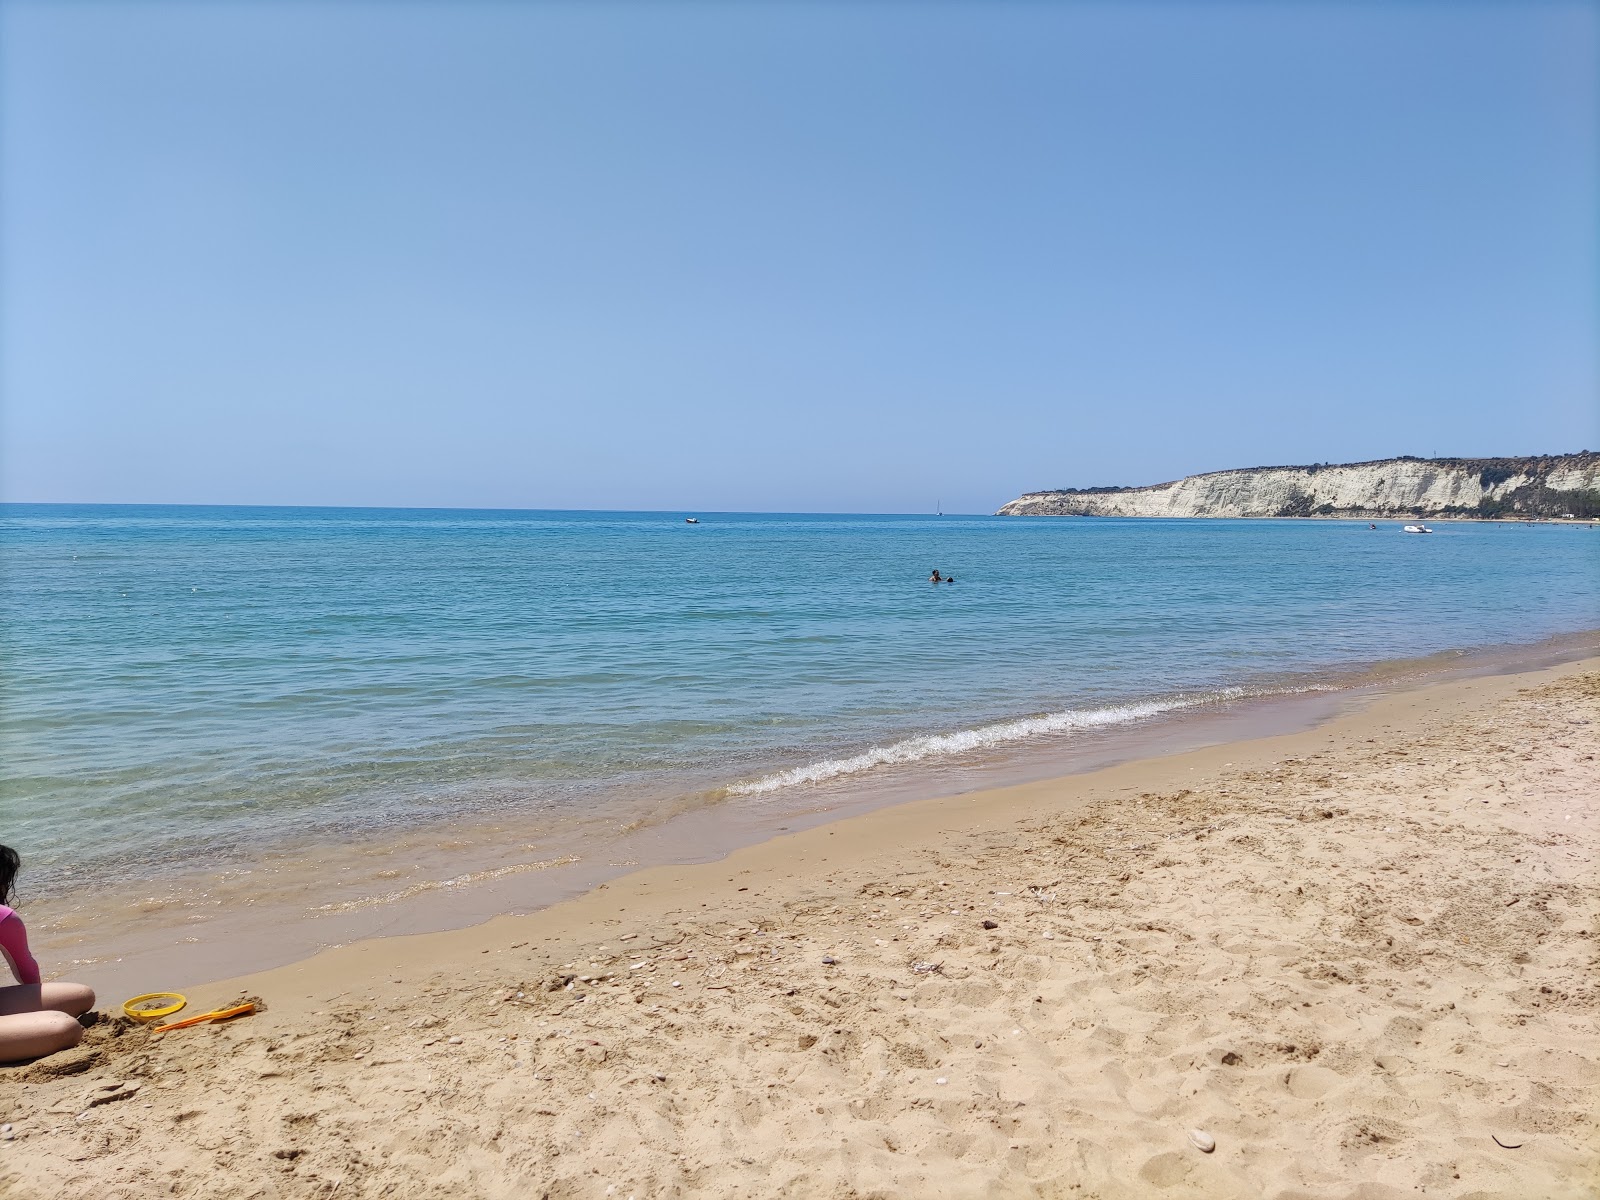 Photo of Spiaggia Di Eraclea Minoa - popular place among relax connoisseurs